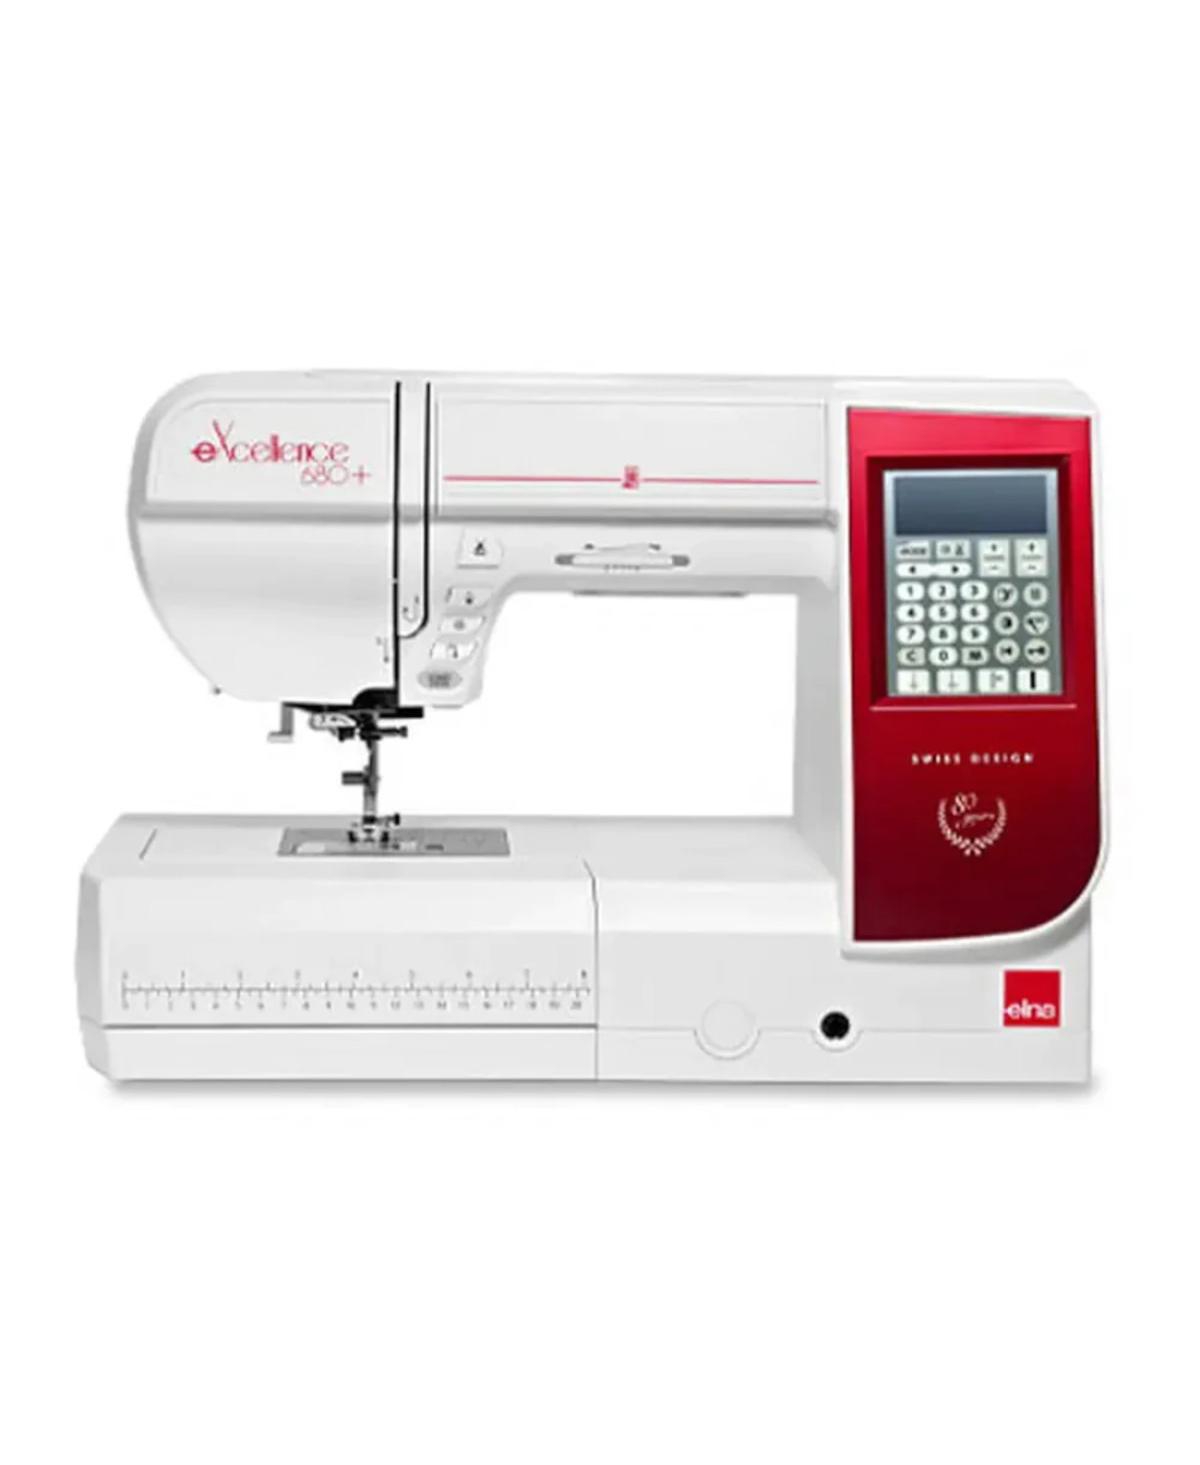 eXcellence 680 Plus Anniversary Edition Computerized Sewing Machine - White